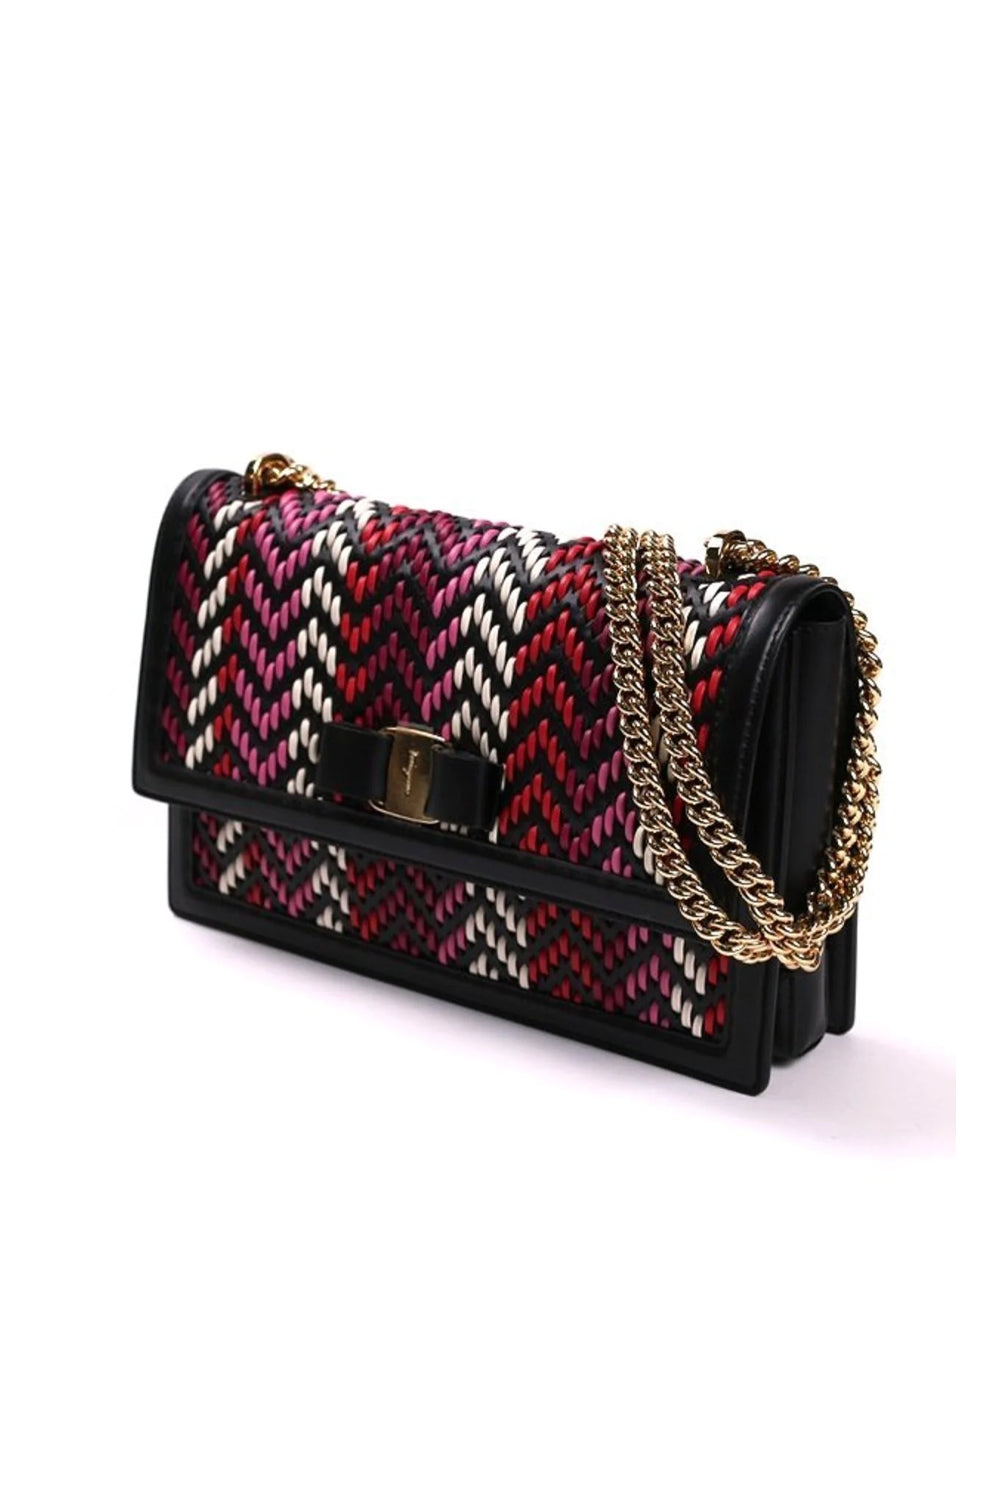 Ferragamo Ginny Multi Pink and Red Plaited Calf Leather Shoulder bag